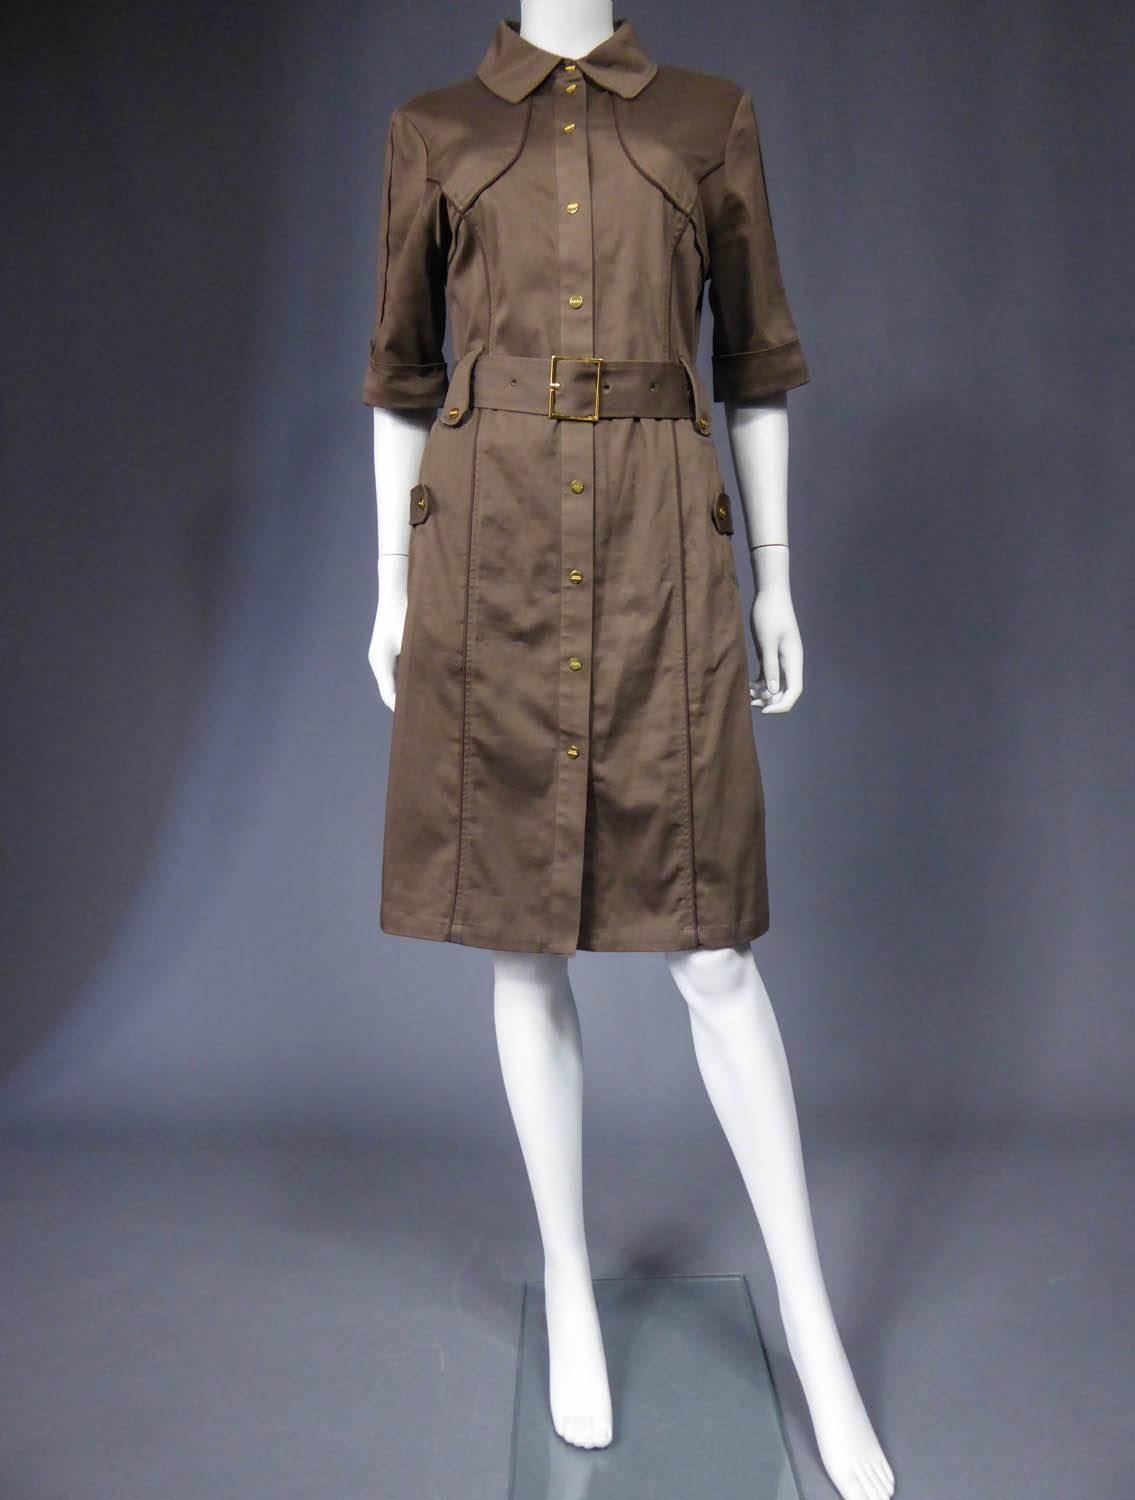 Circa 1970 - 1980

France

Sahararienne dress Rodier in chestnut cotton gabardine. Clear inspiration by Yves Saint Laurent. Dress entirely underlined with brown piping, flaps on pockets, belt and sleeves. Shirt-like collar from masculine